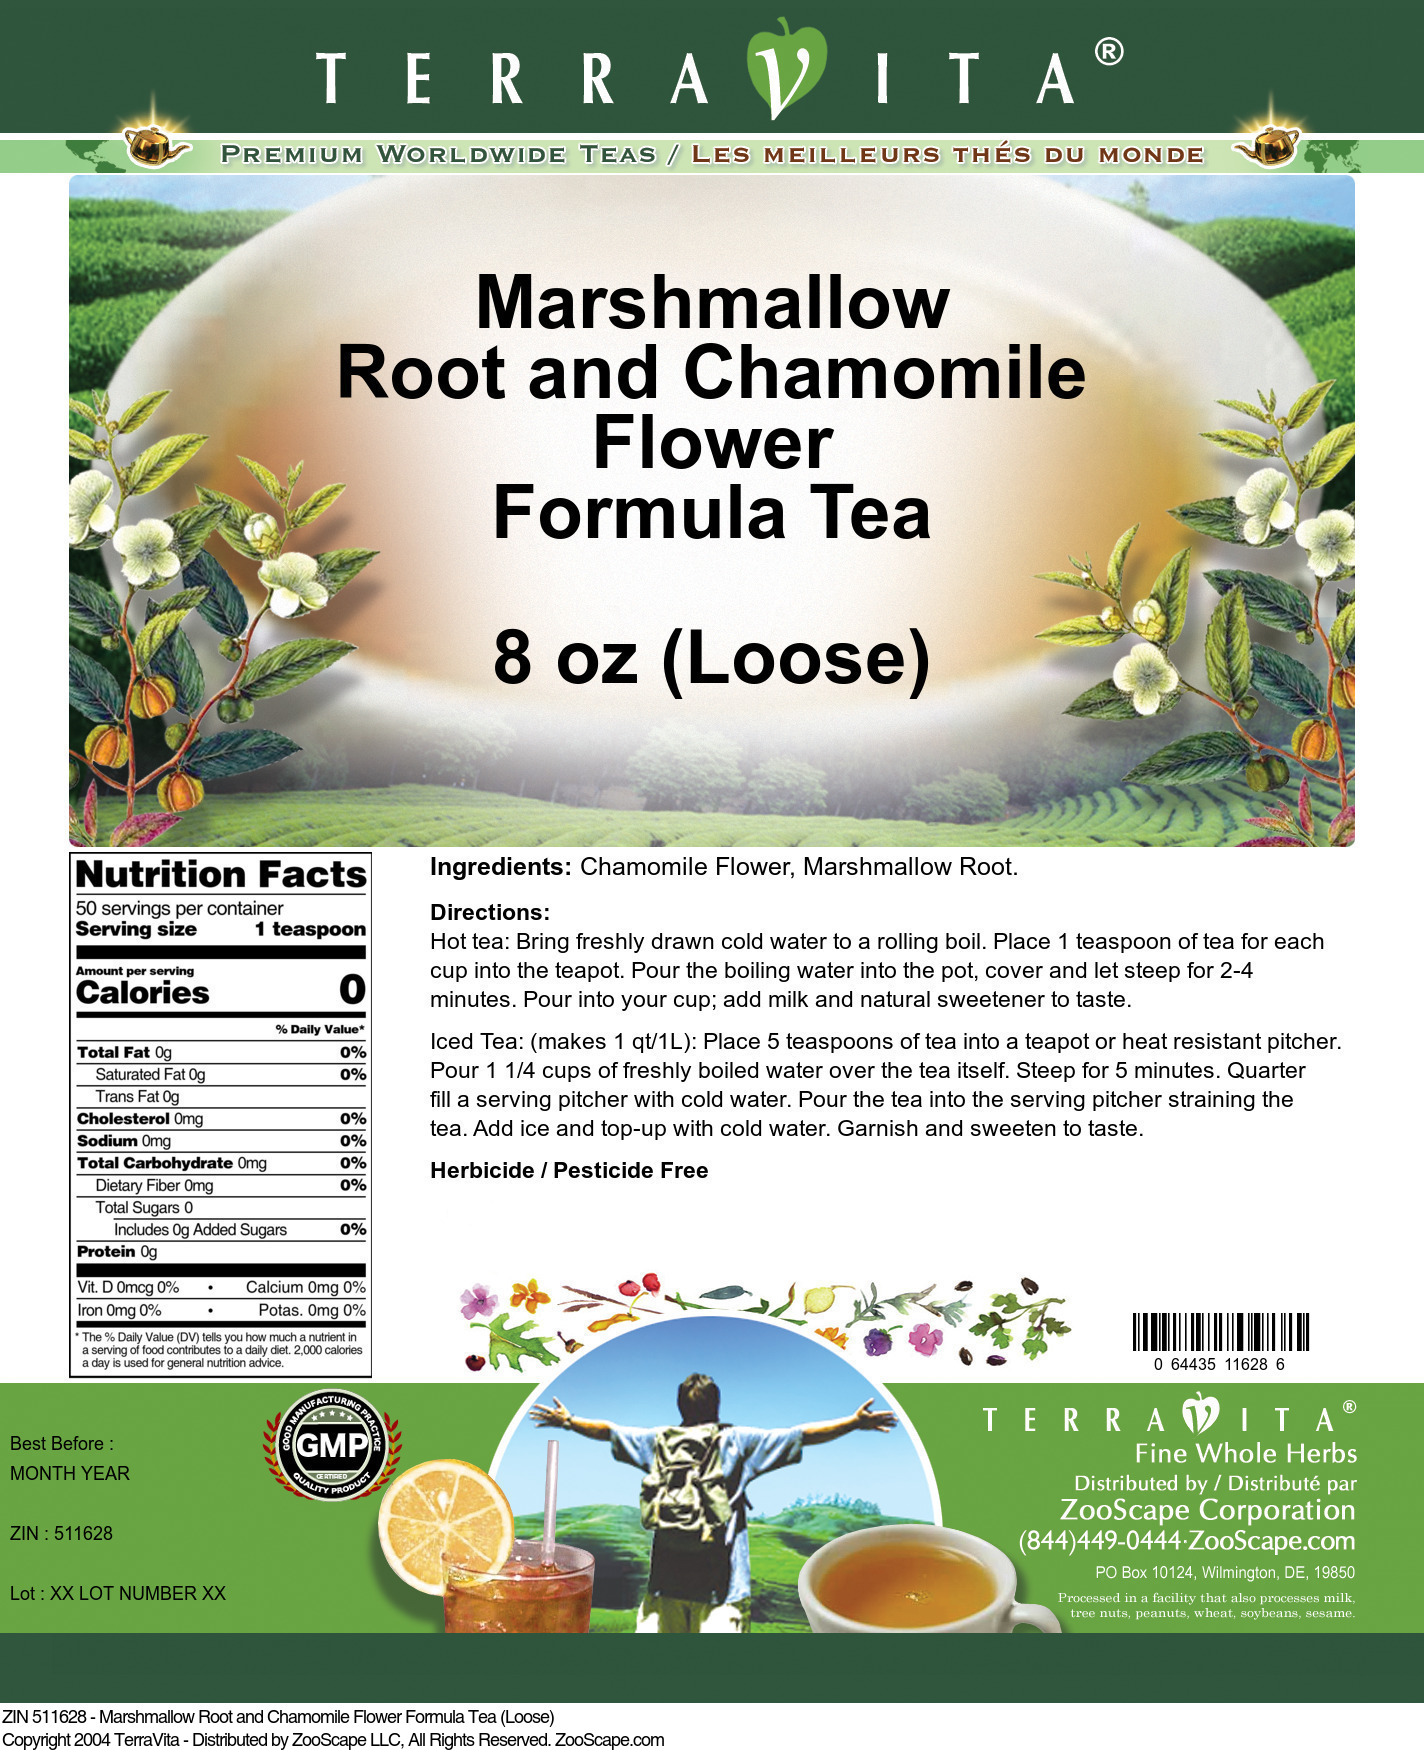 Marshmallow Root and Chamomile Flower Formula Tea (Loose) - Label